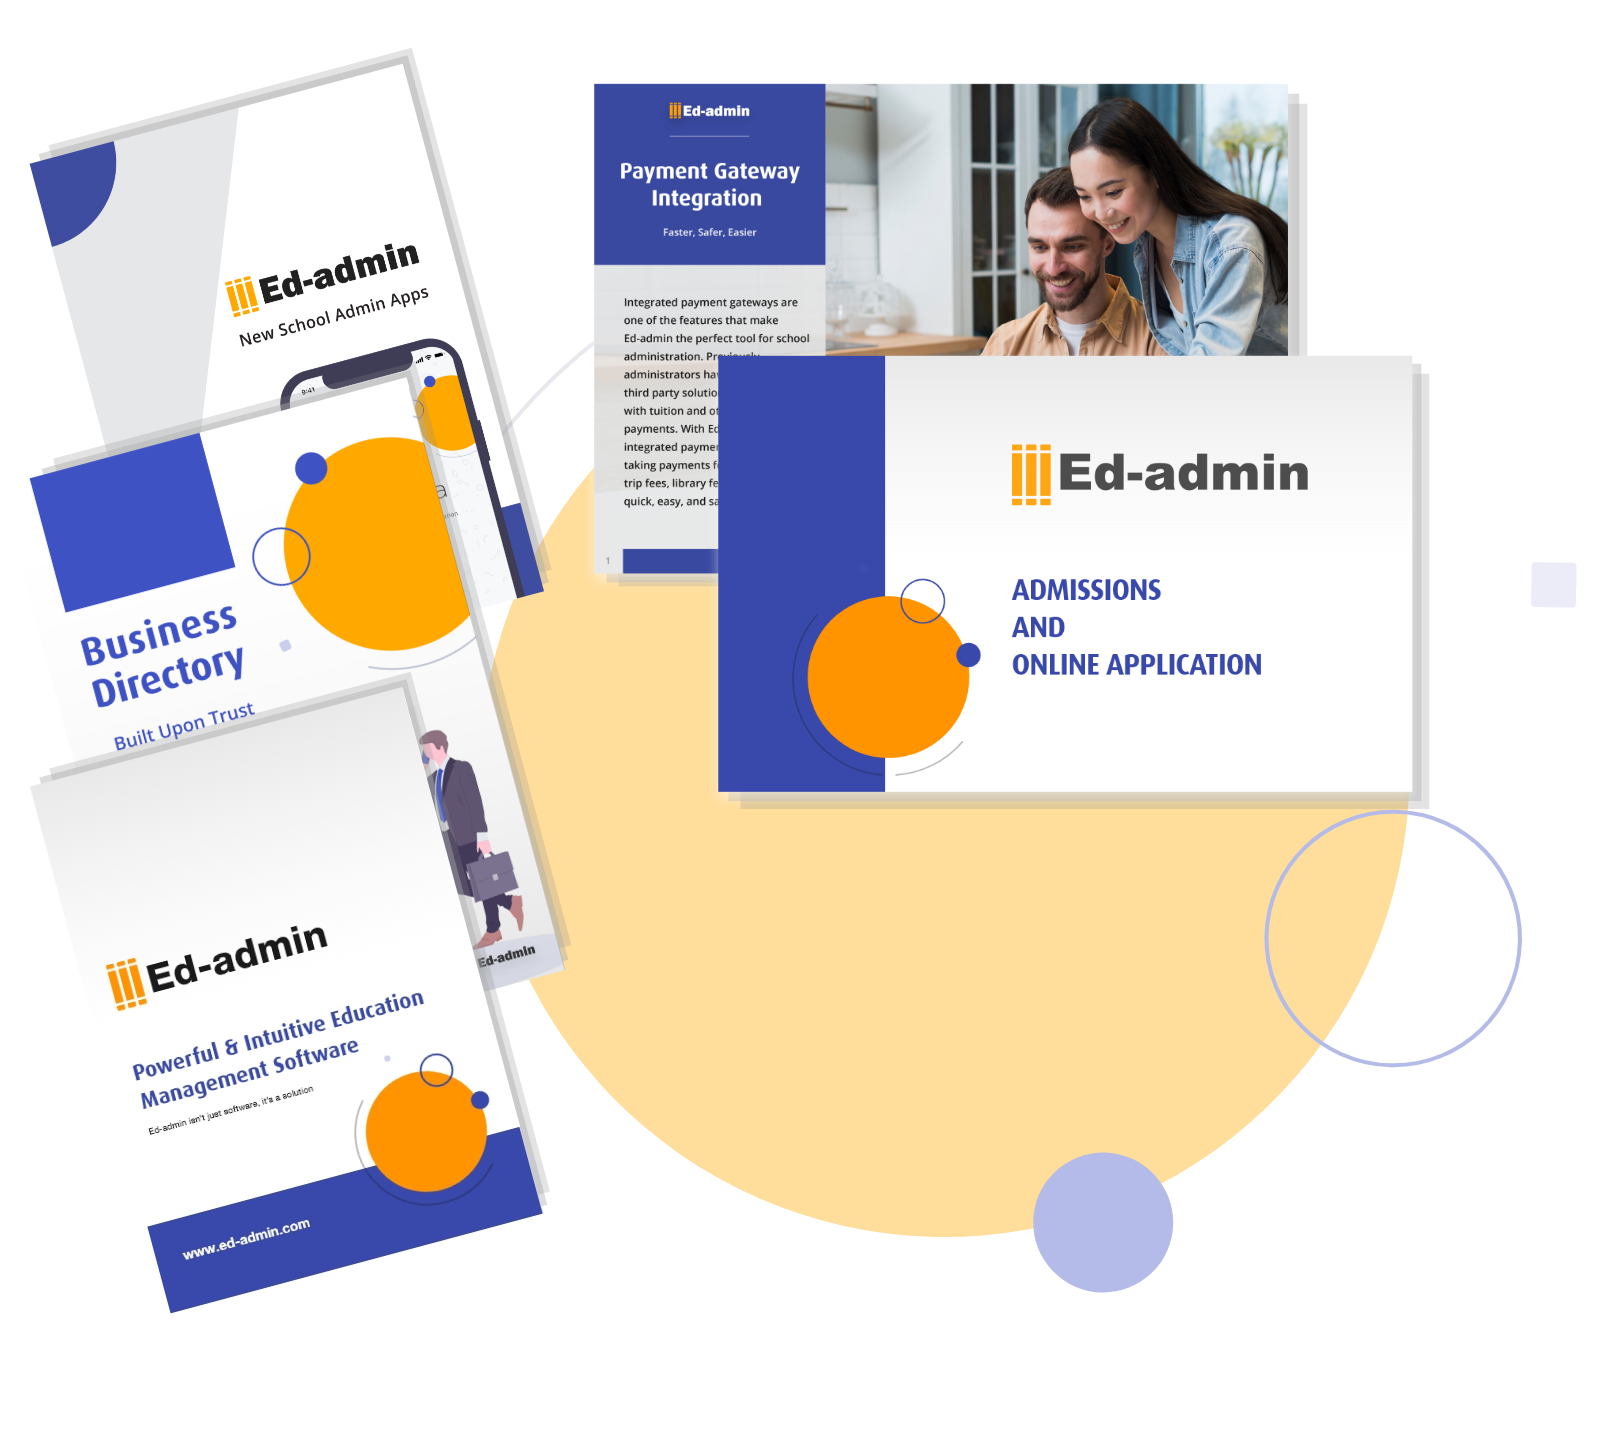 Brochures and Catalogues Read about Ed-admin at your own pace